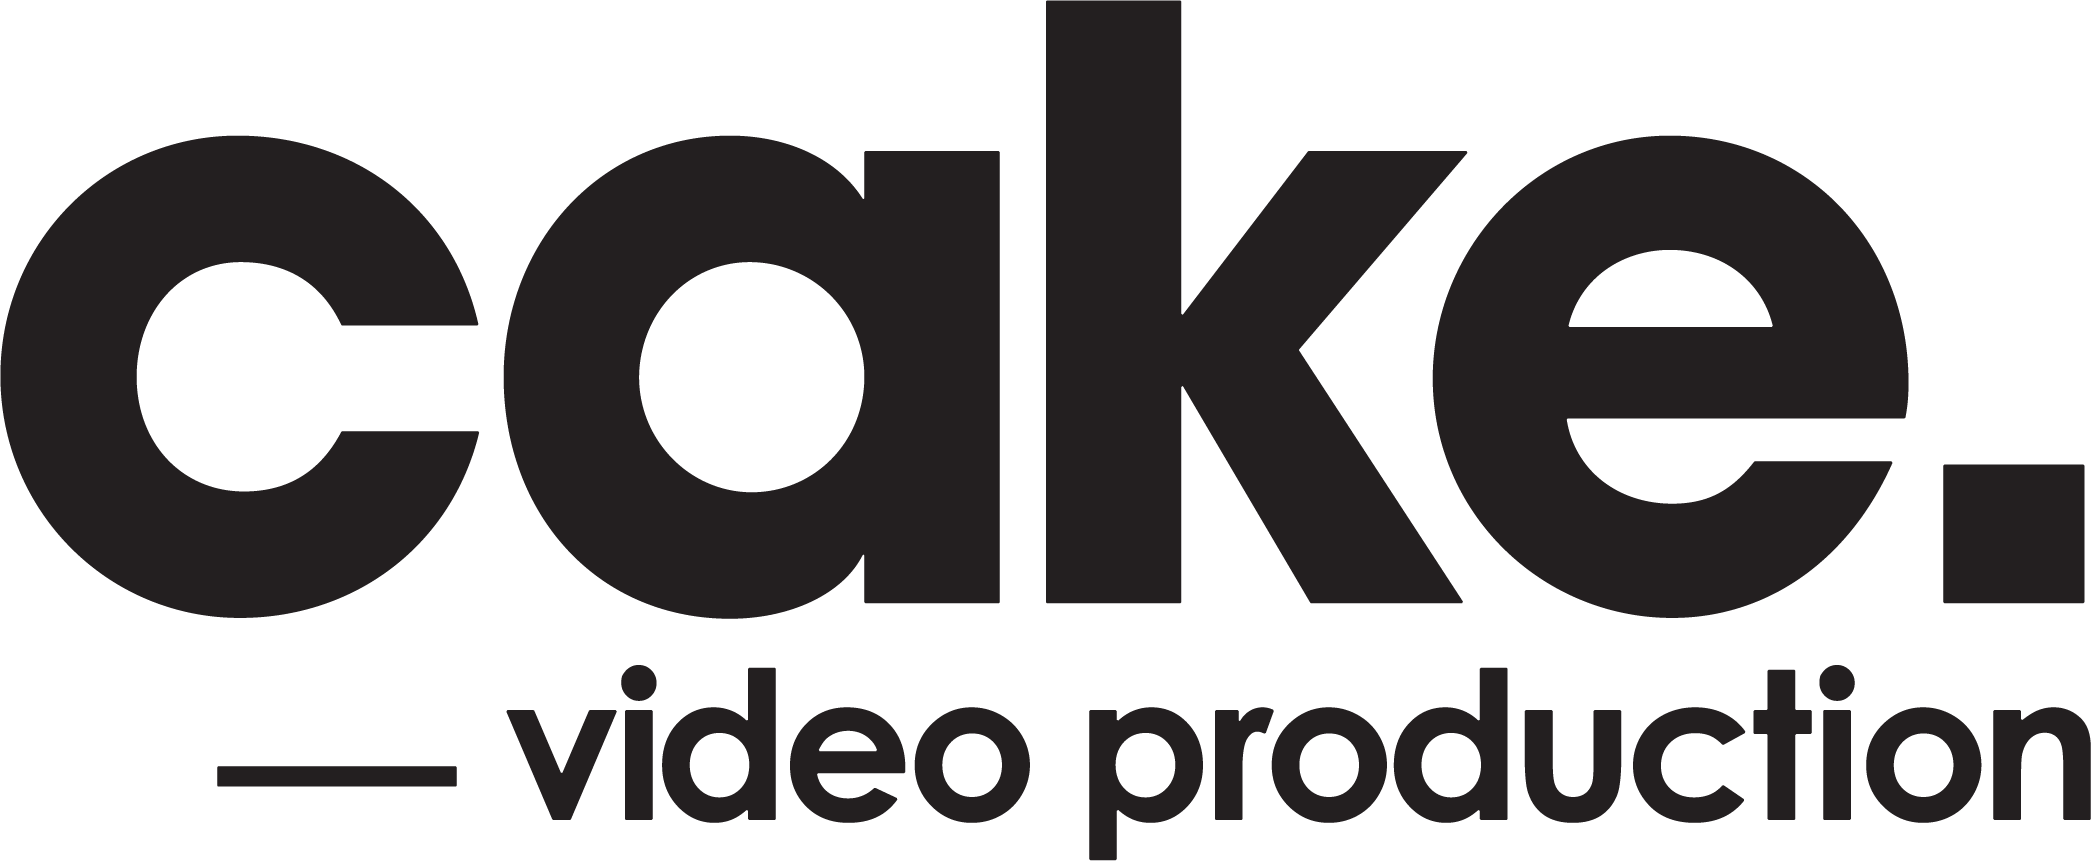 cake. - video production